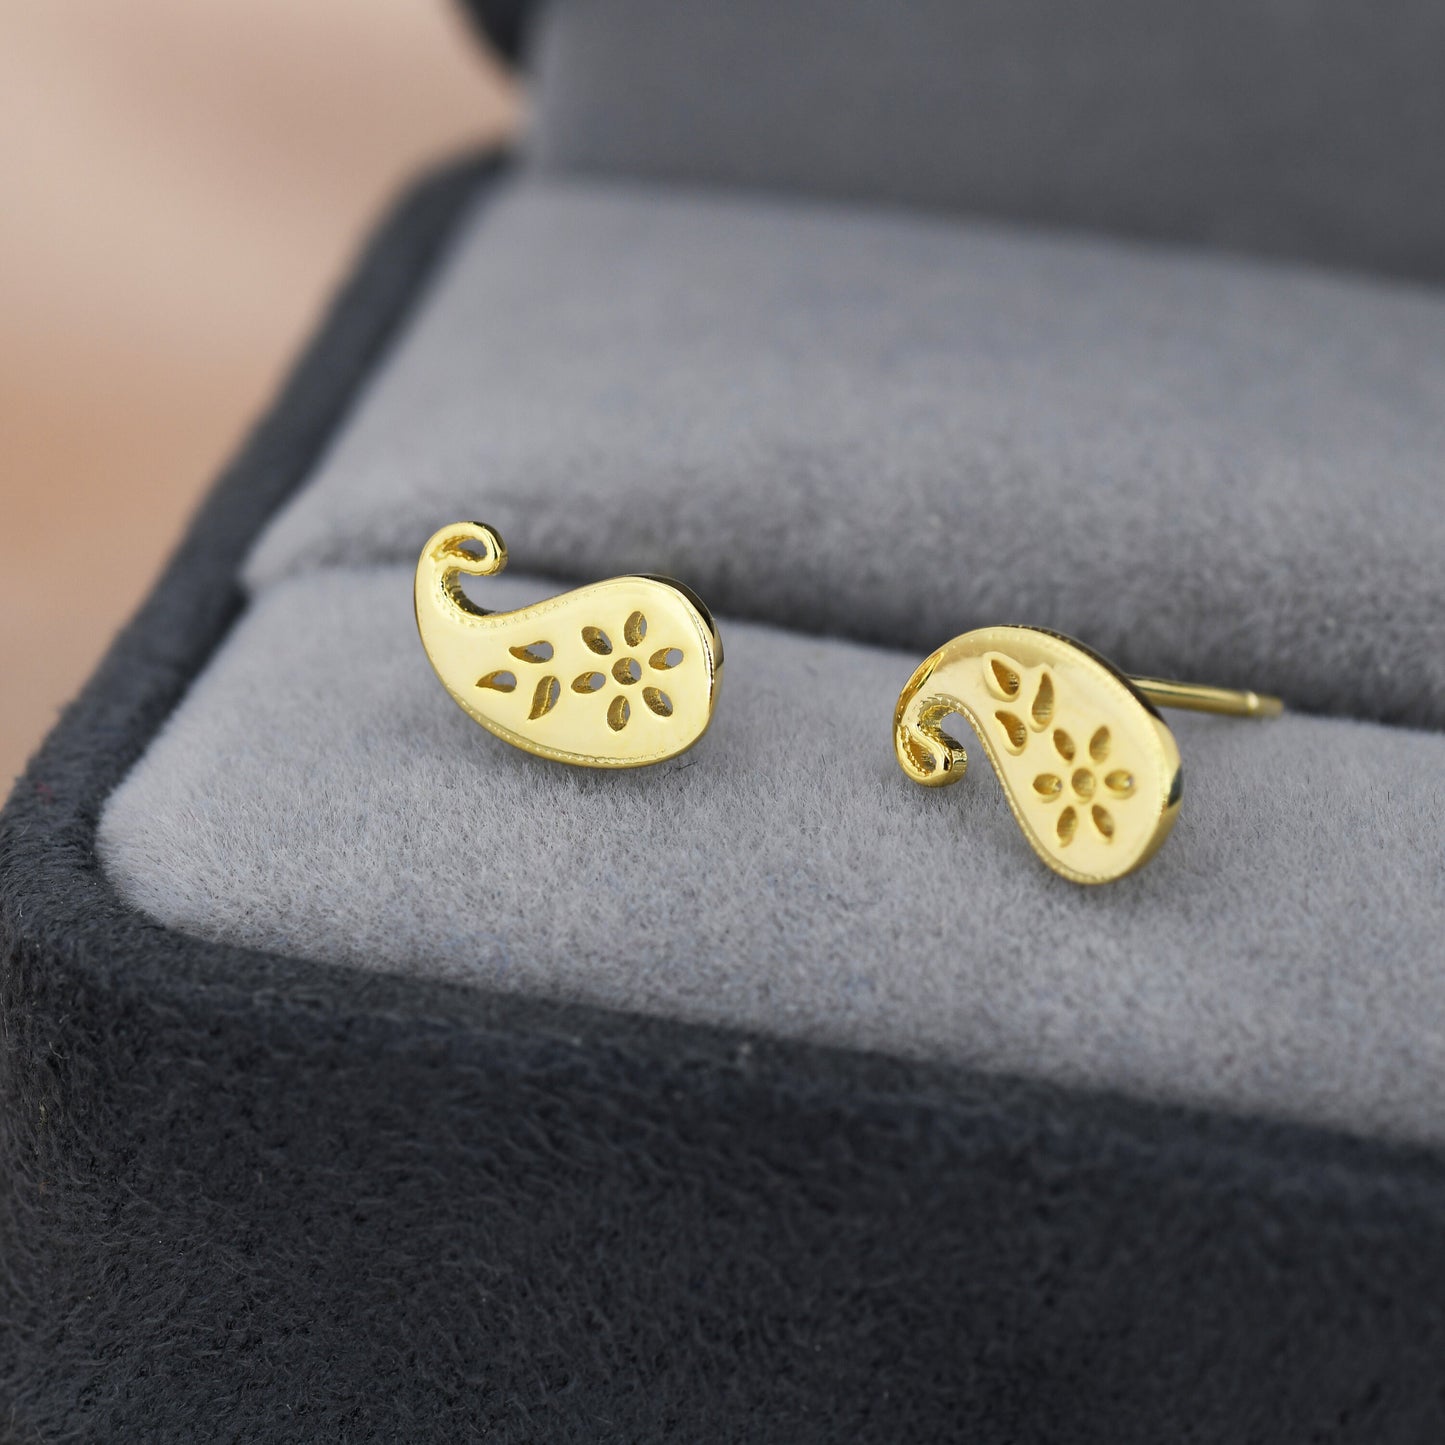 Paisley Pattern Stud Earrings in Sterling Silver, Silver or Gold, Small Stacking Earrings